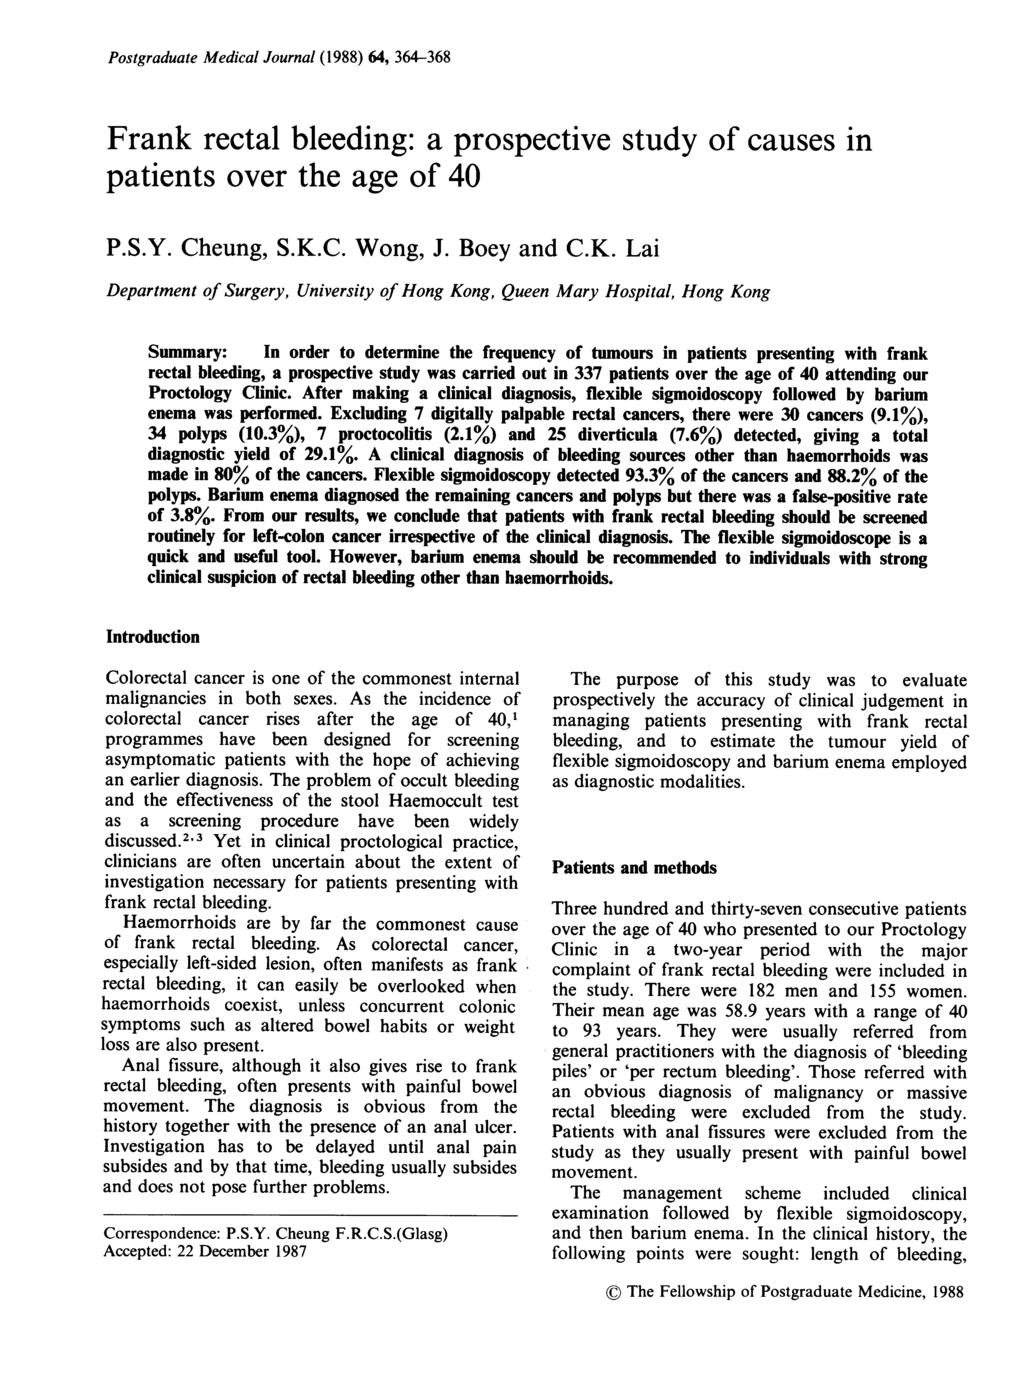 Postgraduate Medical Journal (1988) 64, 364-368 Frank rectal bleeding: a prospective study of causes in patients over the age of 40 P.S.Y. Cheung, S.K.